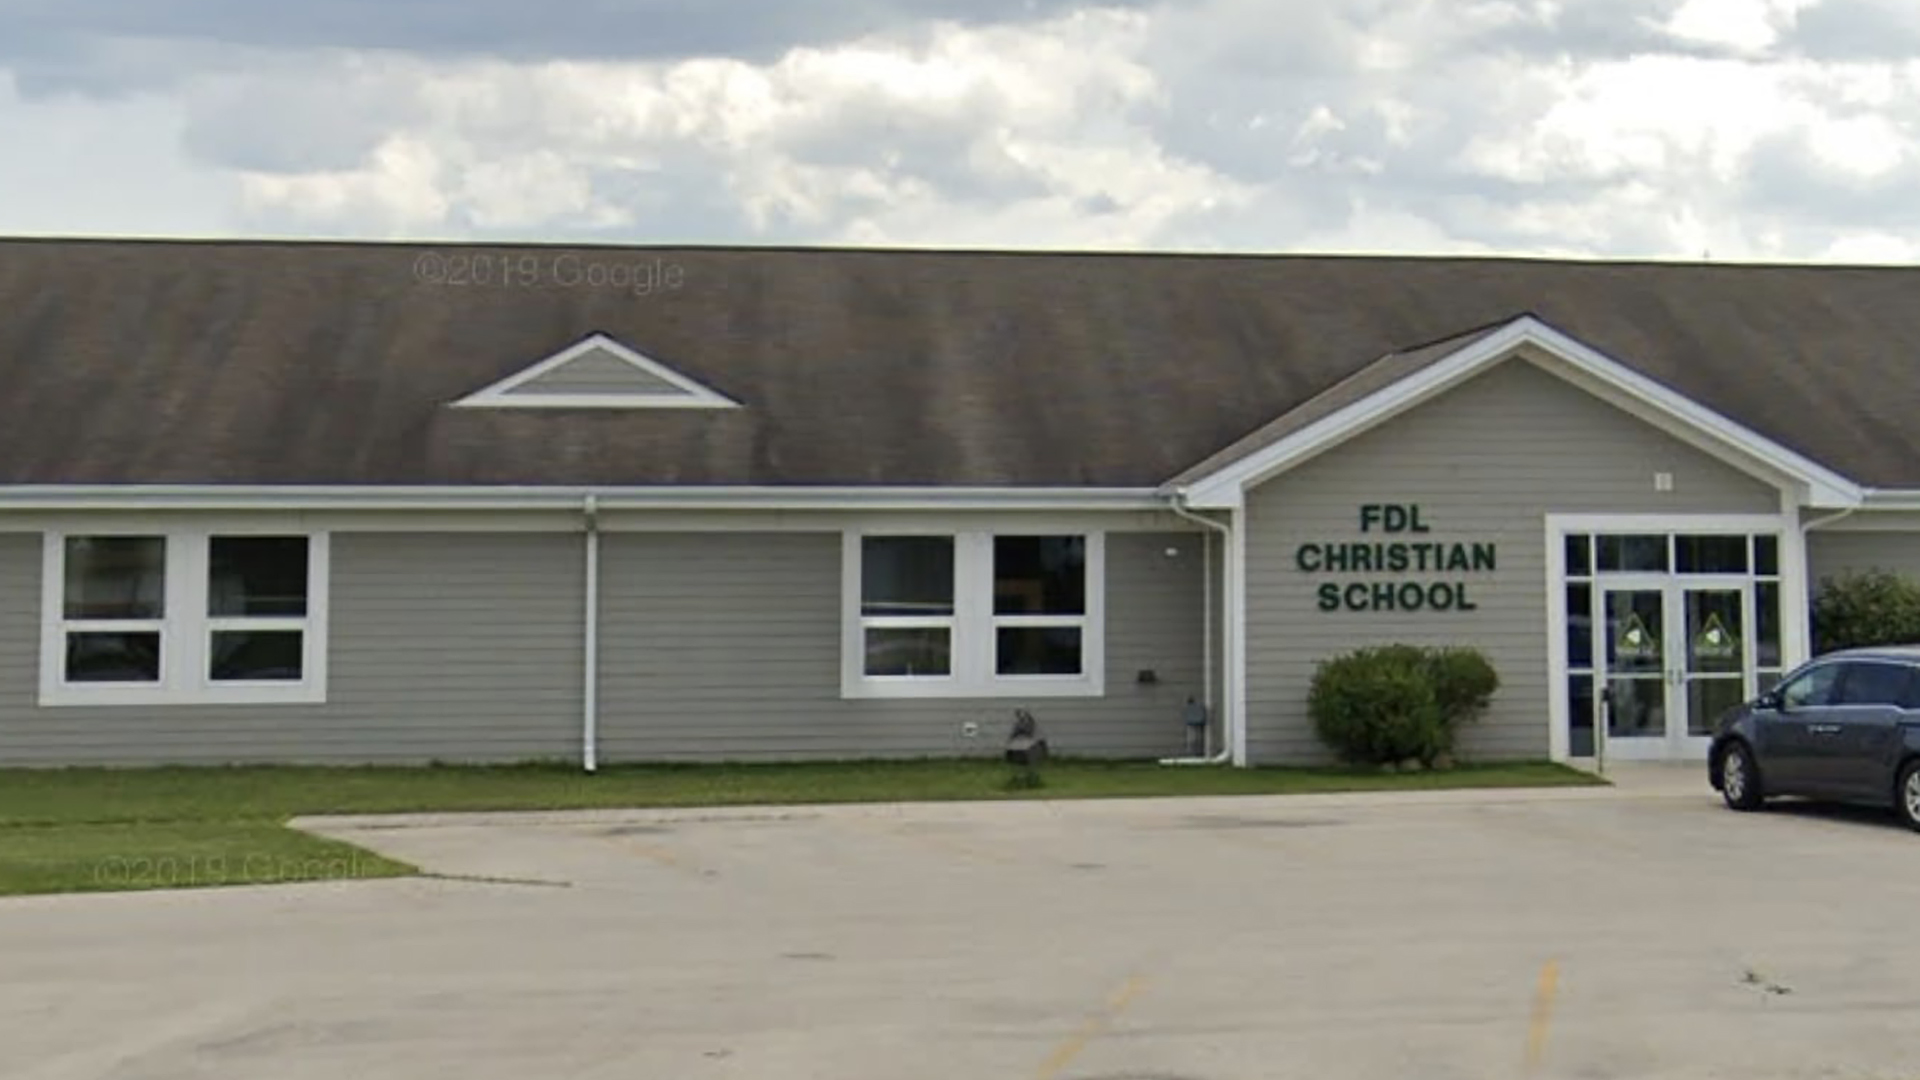 A Google Maps photo shows a one-story building with a sign reading "FDL Christian School," with a car in a parking lot in the foreground.